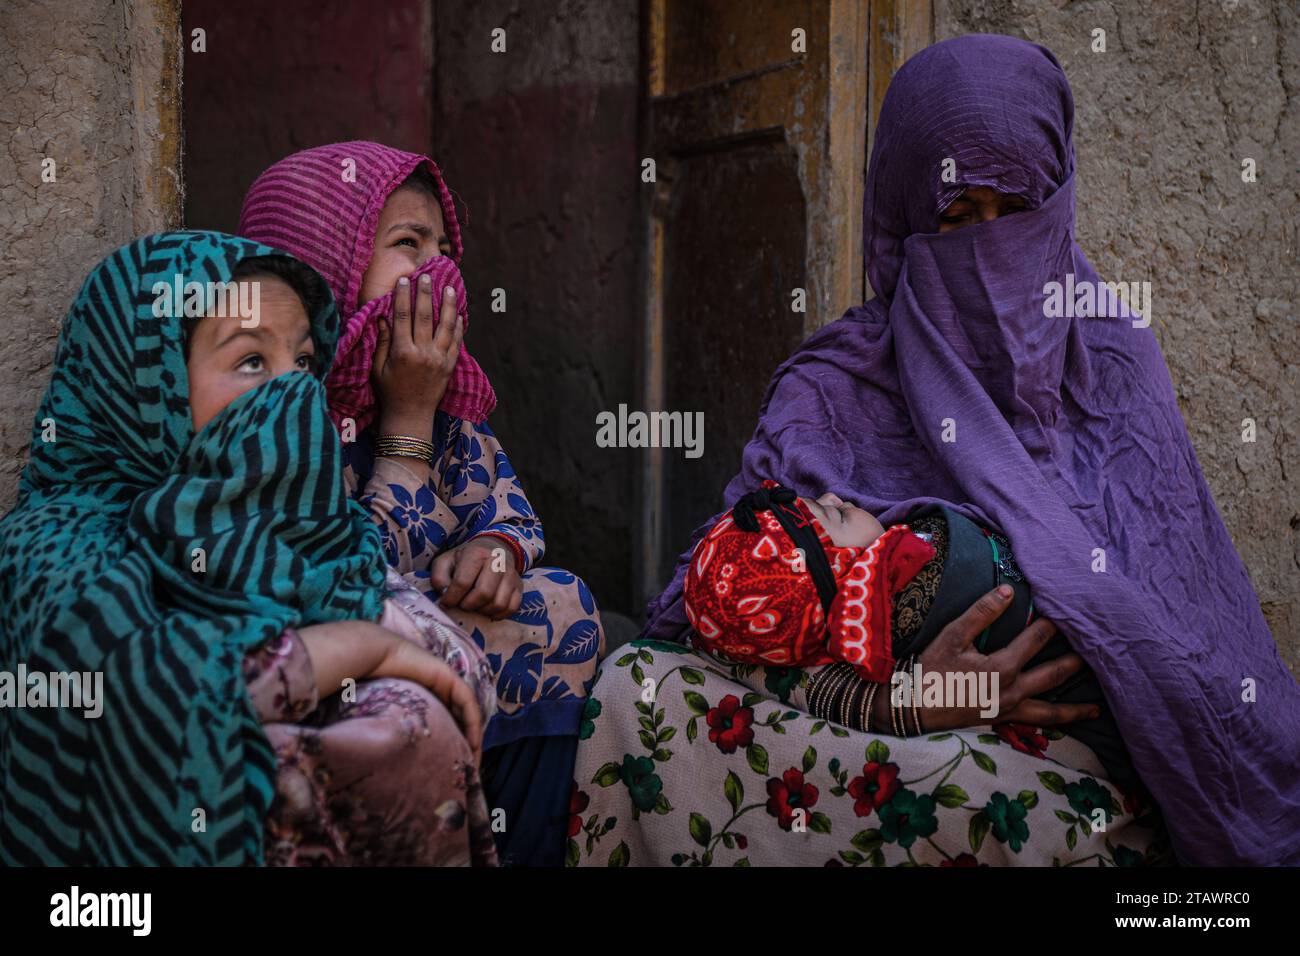 A sad widow in need, accompanied by her children, represents Afghan families facing poverty and hardship | Refugee family. Stock Photo